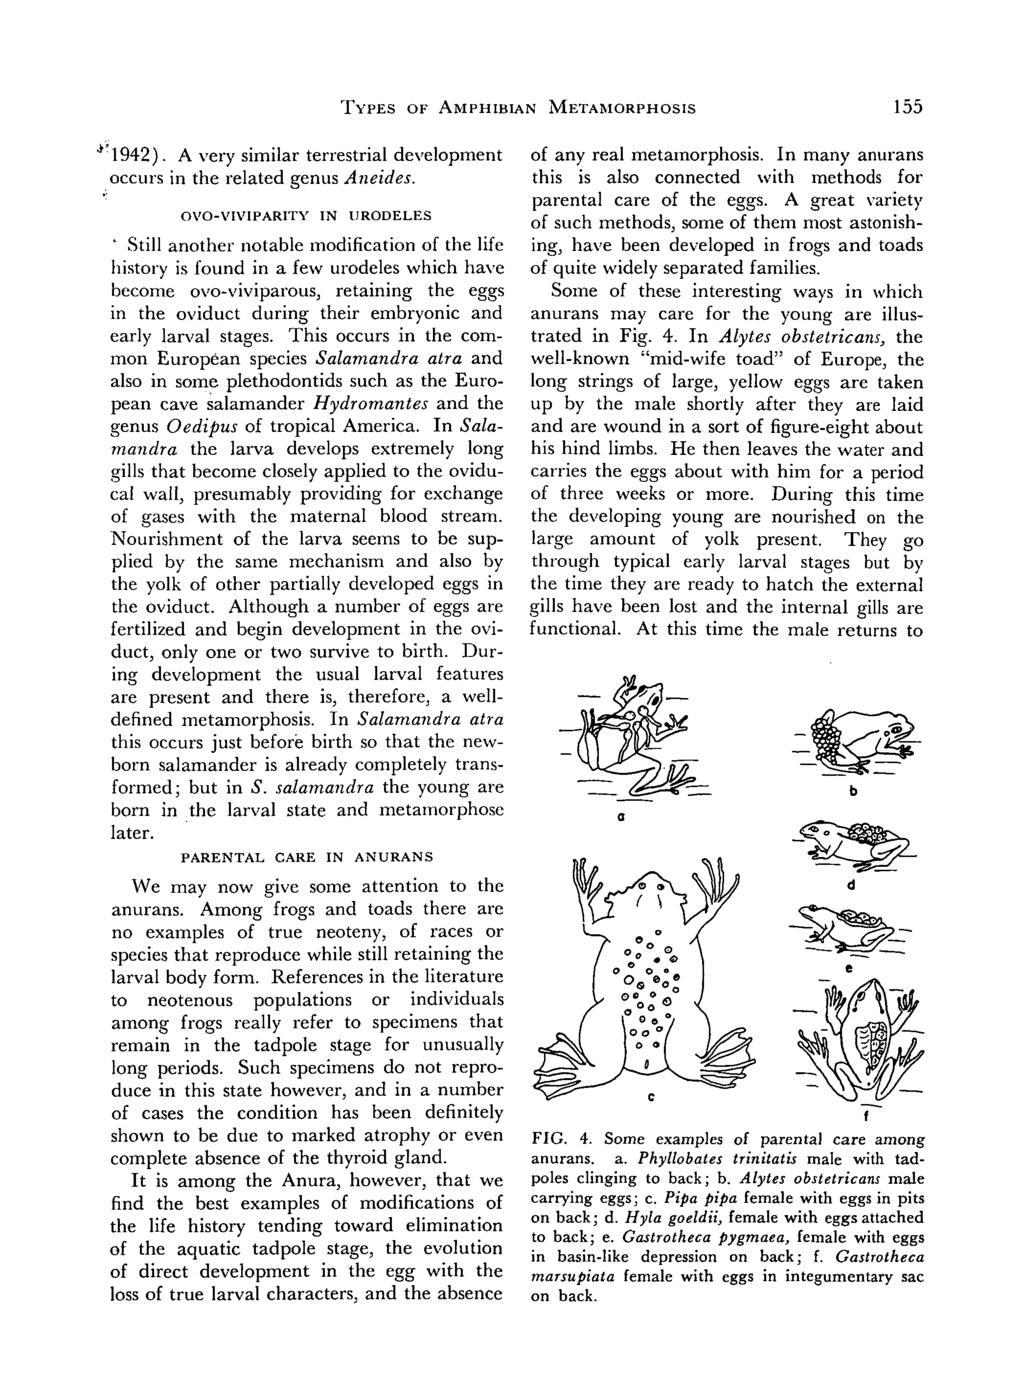 TYPES OF AMPHIBIAN METAMORPHOSIS 155 "* 1942). A very similar terrestrial development occurs in the related genus Aneides.